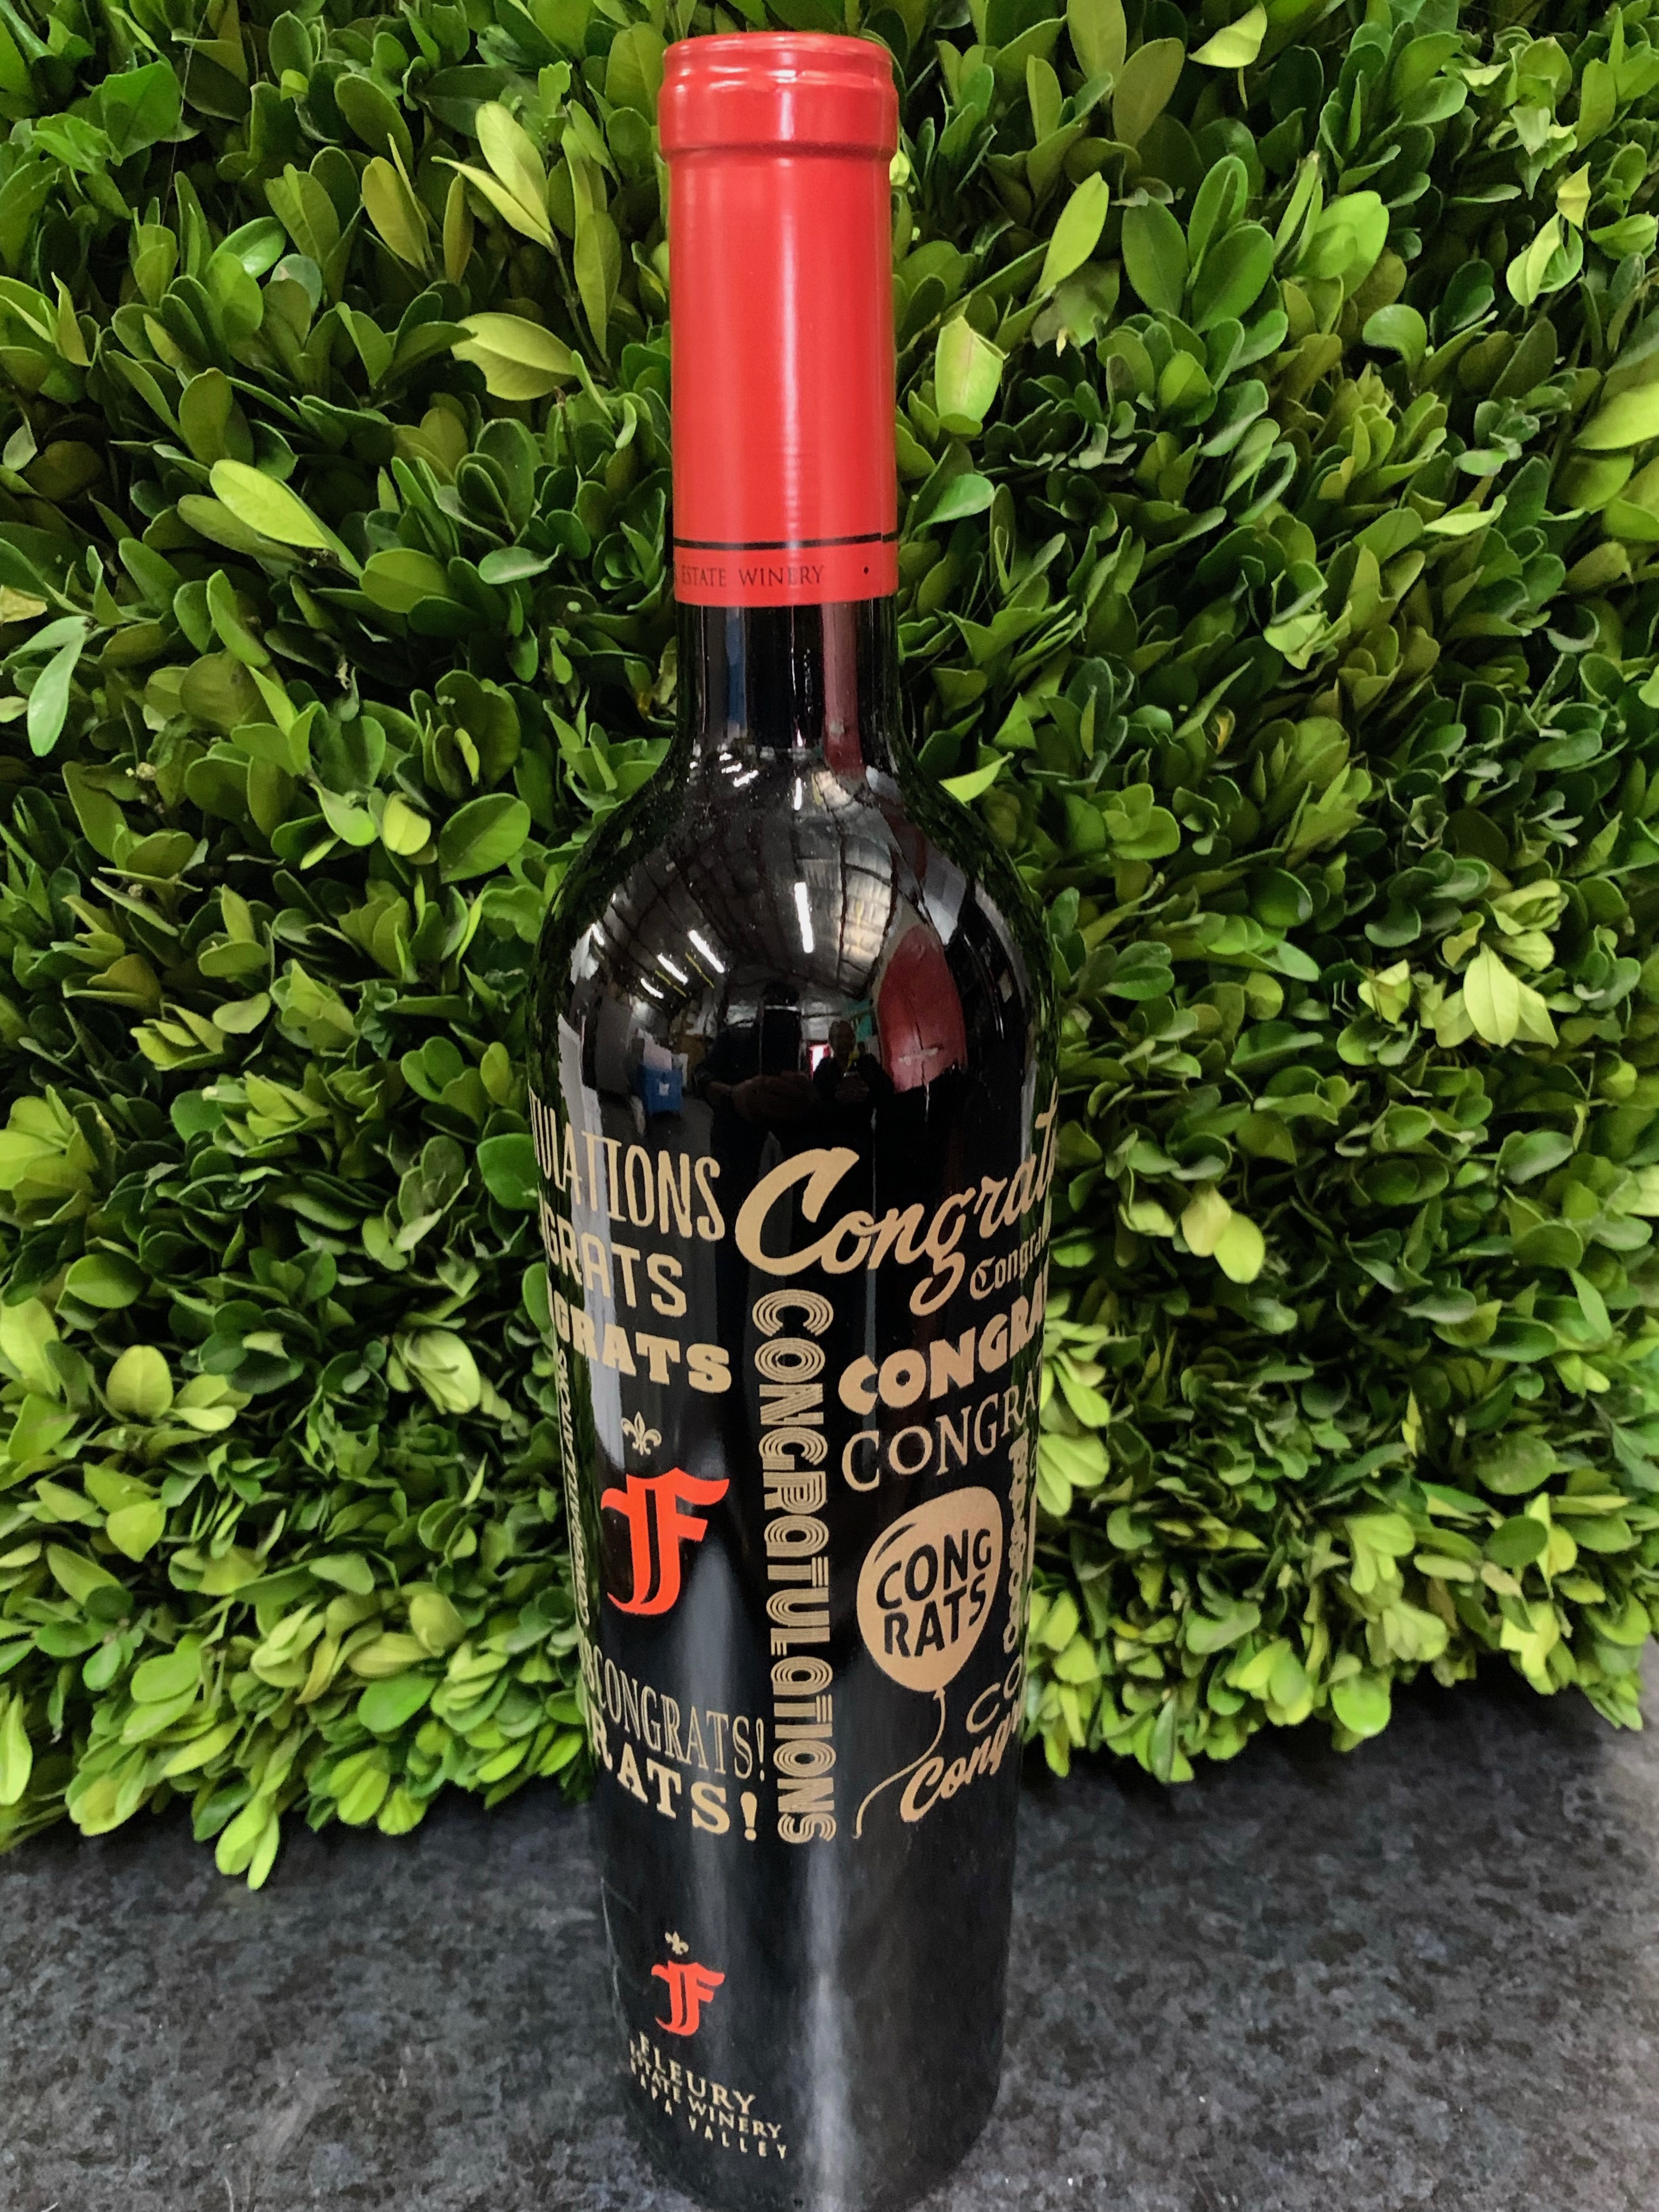 Product Image for 2017 "Congratulations", Red Wine Blend 